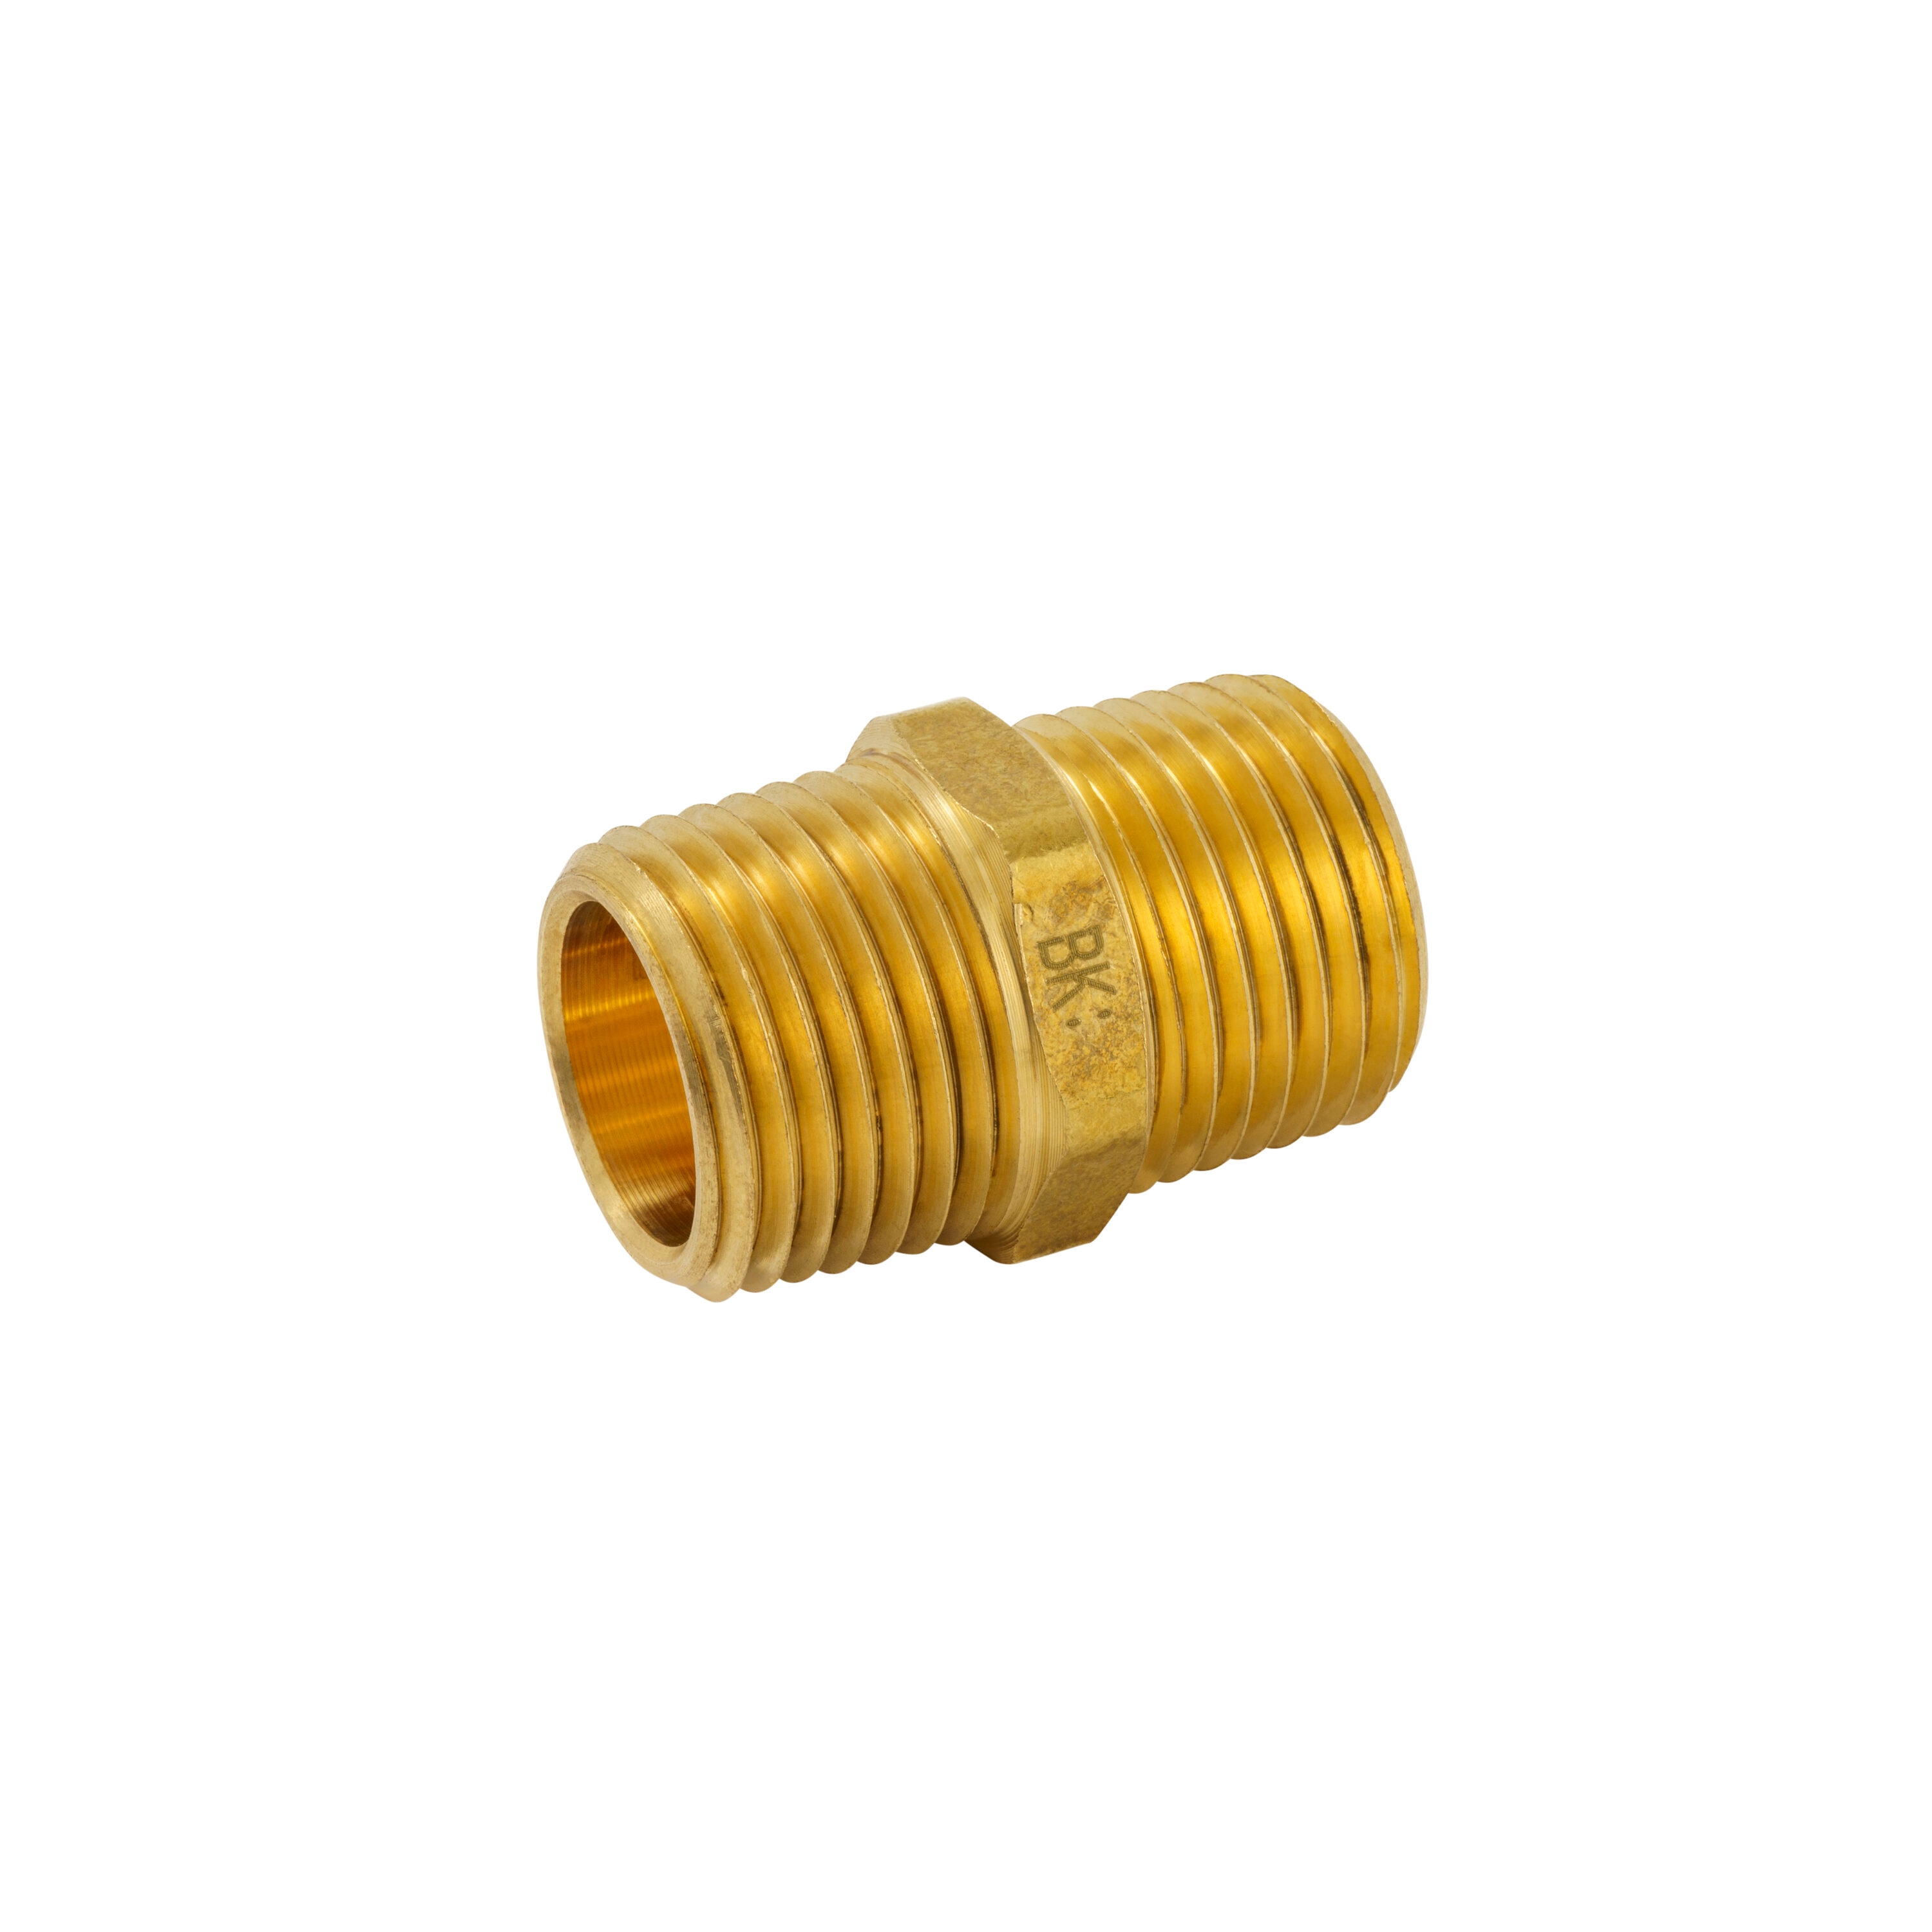 12MM Tube to #8 Hose Straight Compression Fitting - Cold Hose